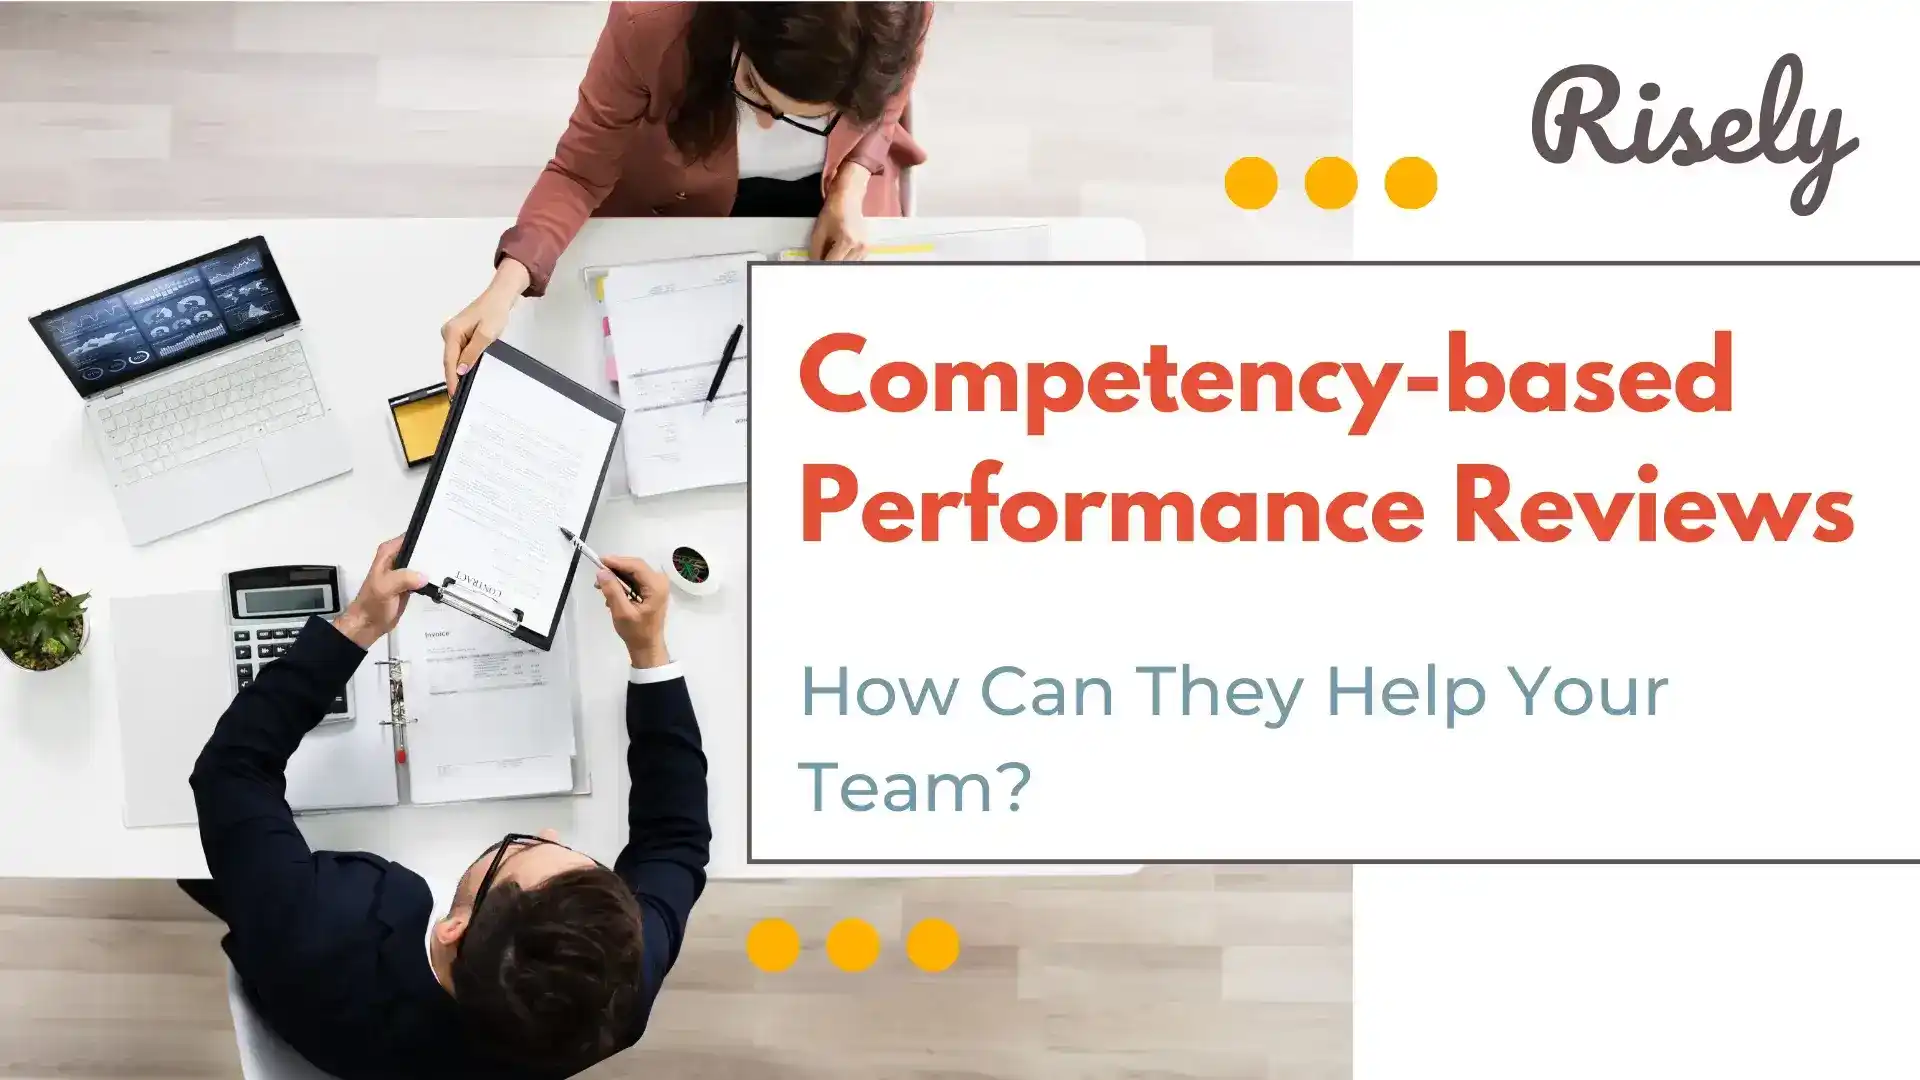 Competency-based Performance Reviews: How Can They Help Your Team?